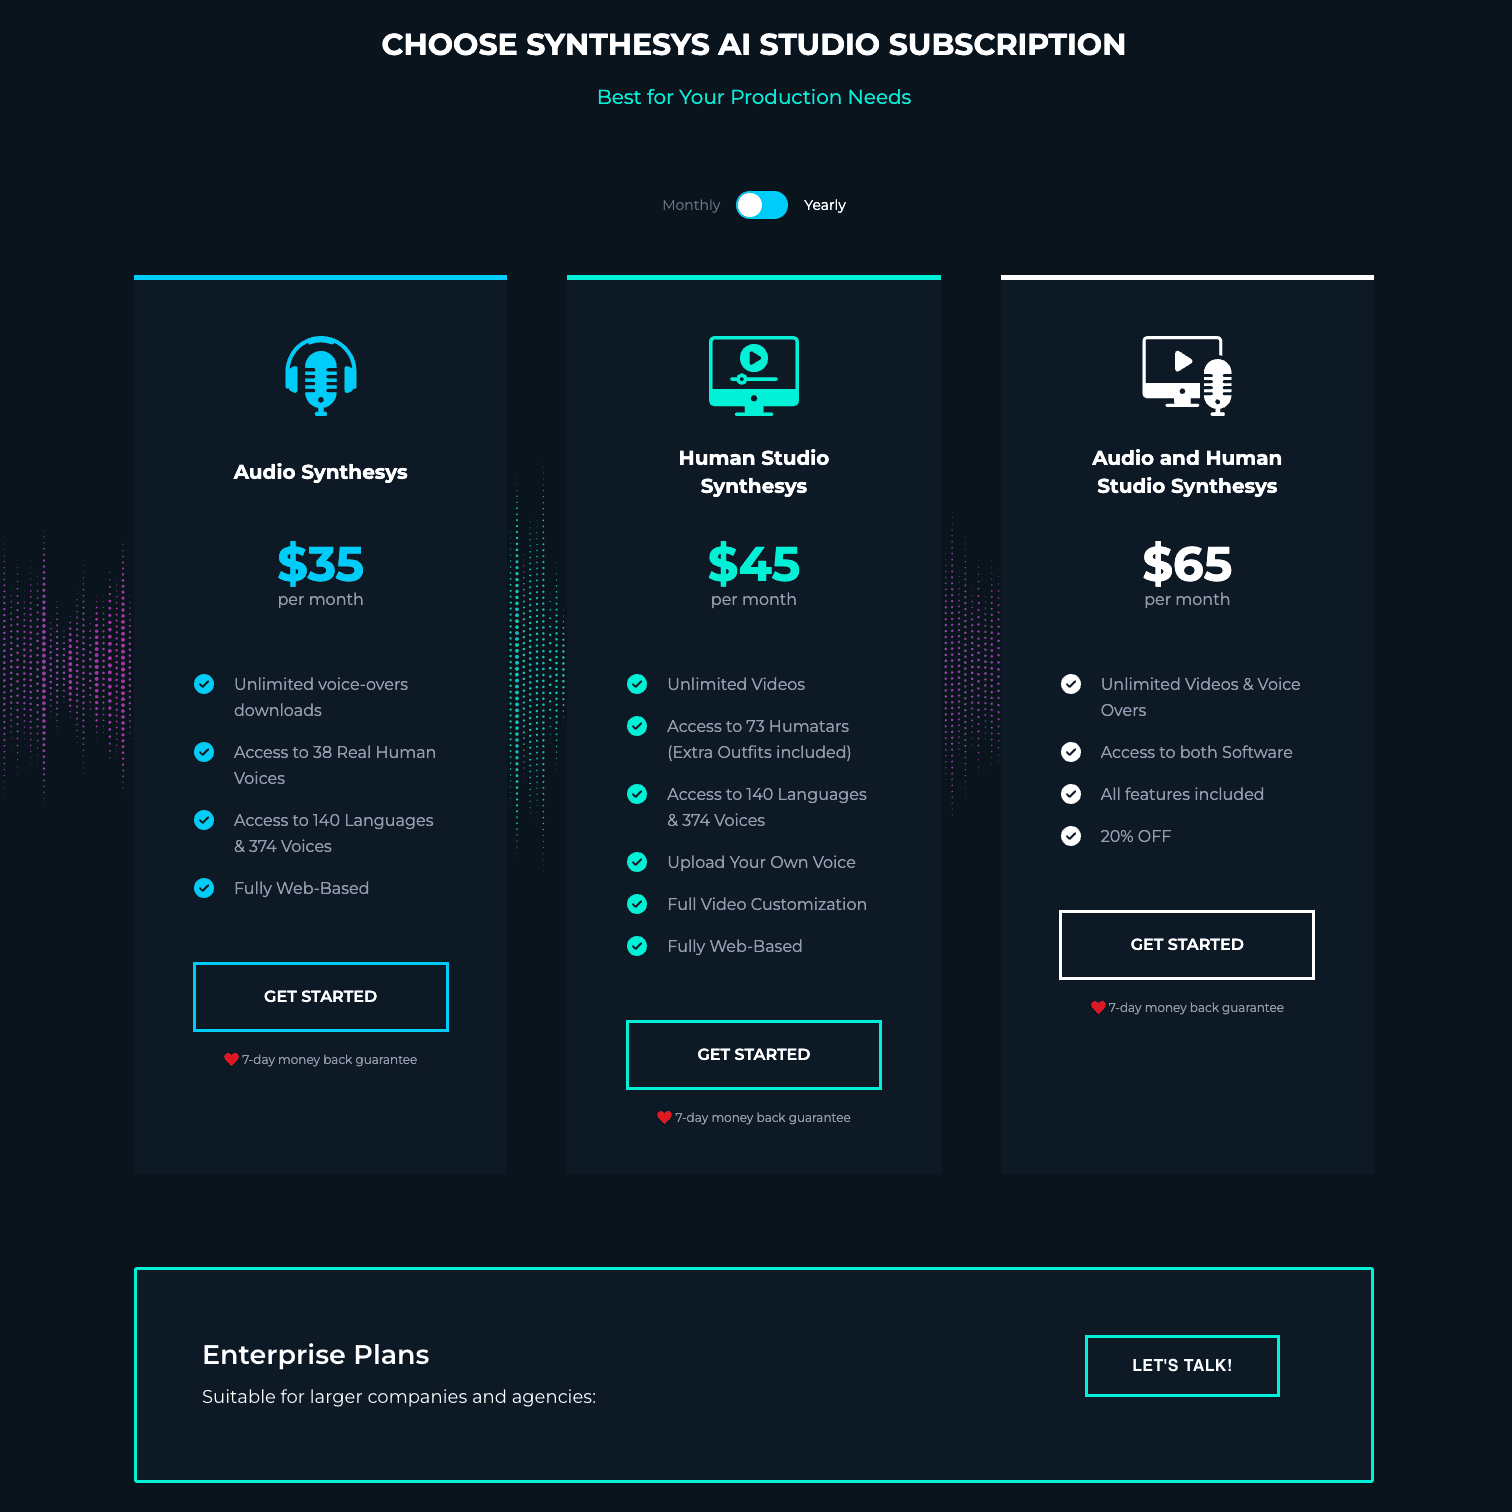 Synthesys' pricing options